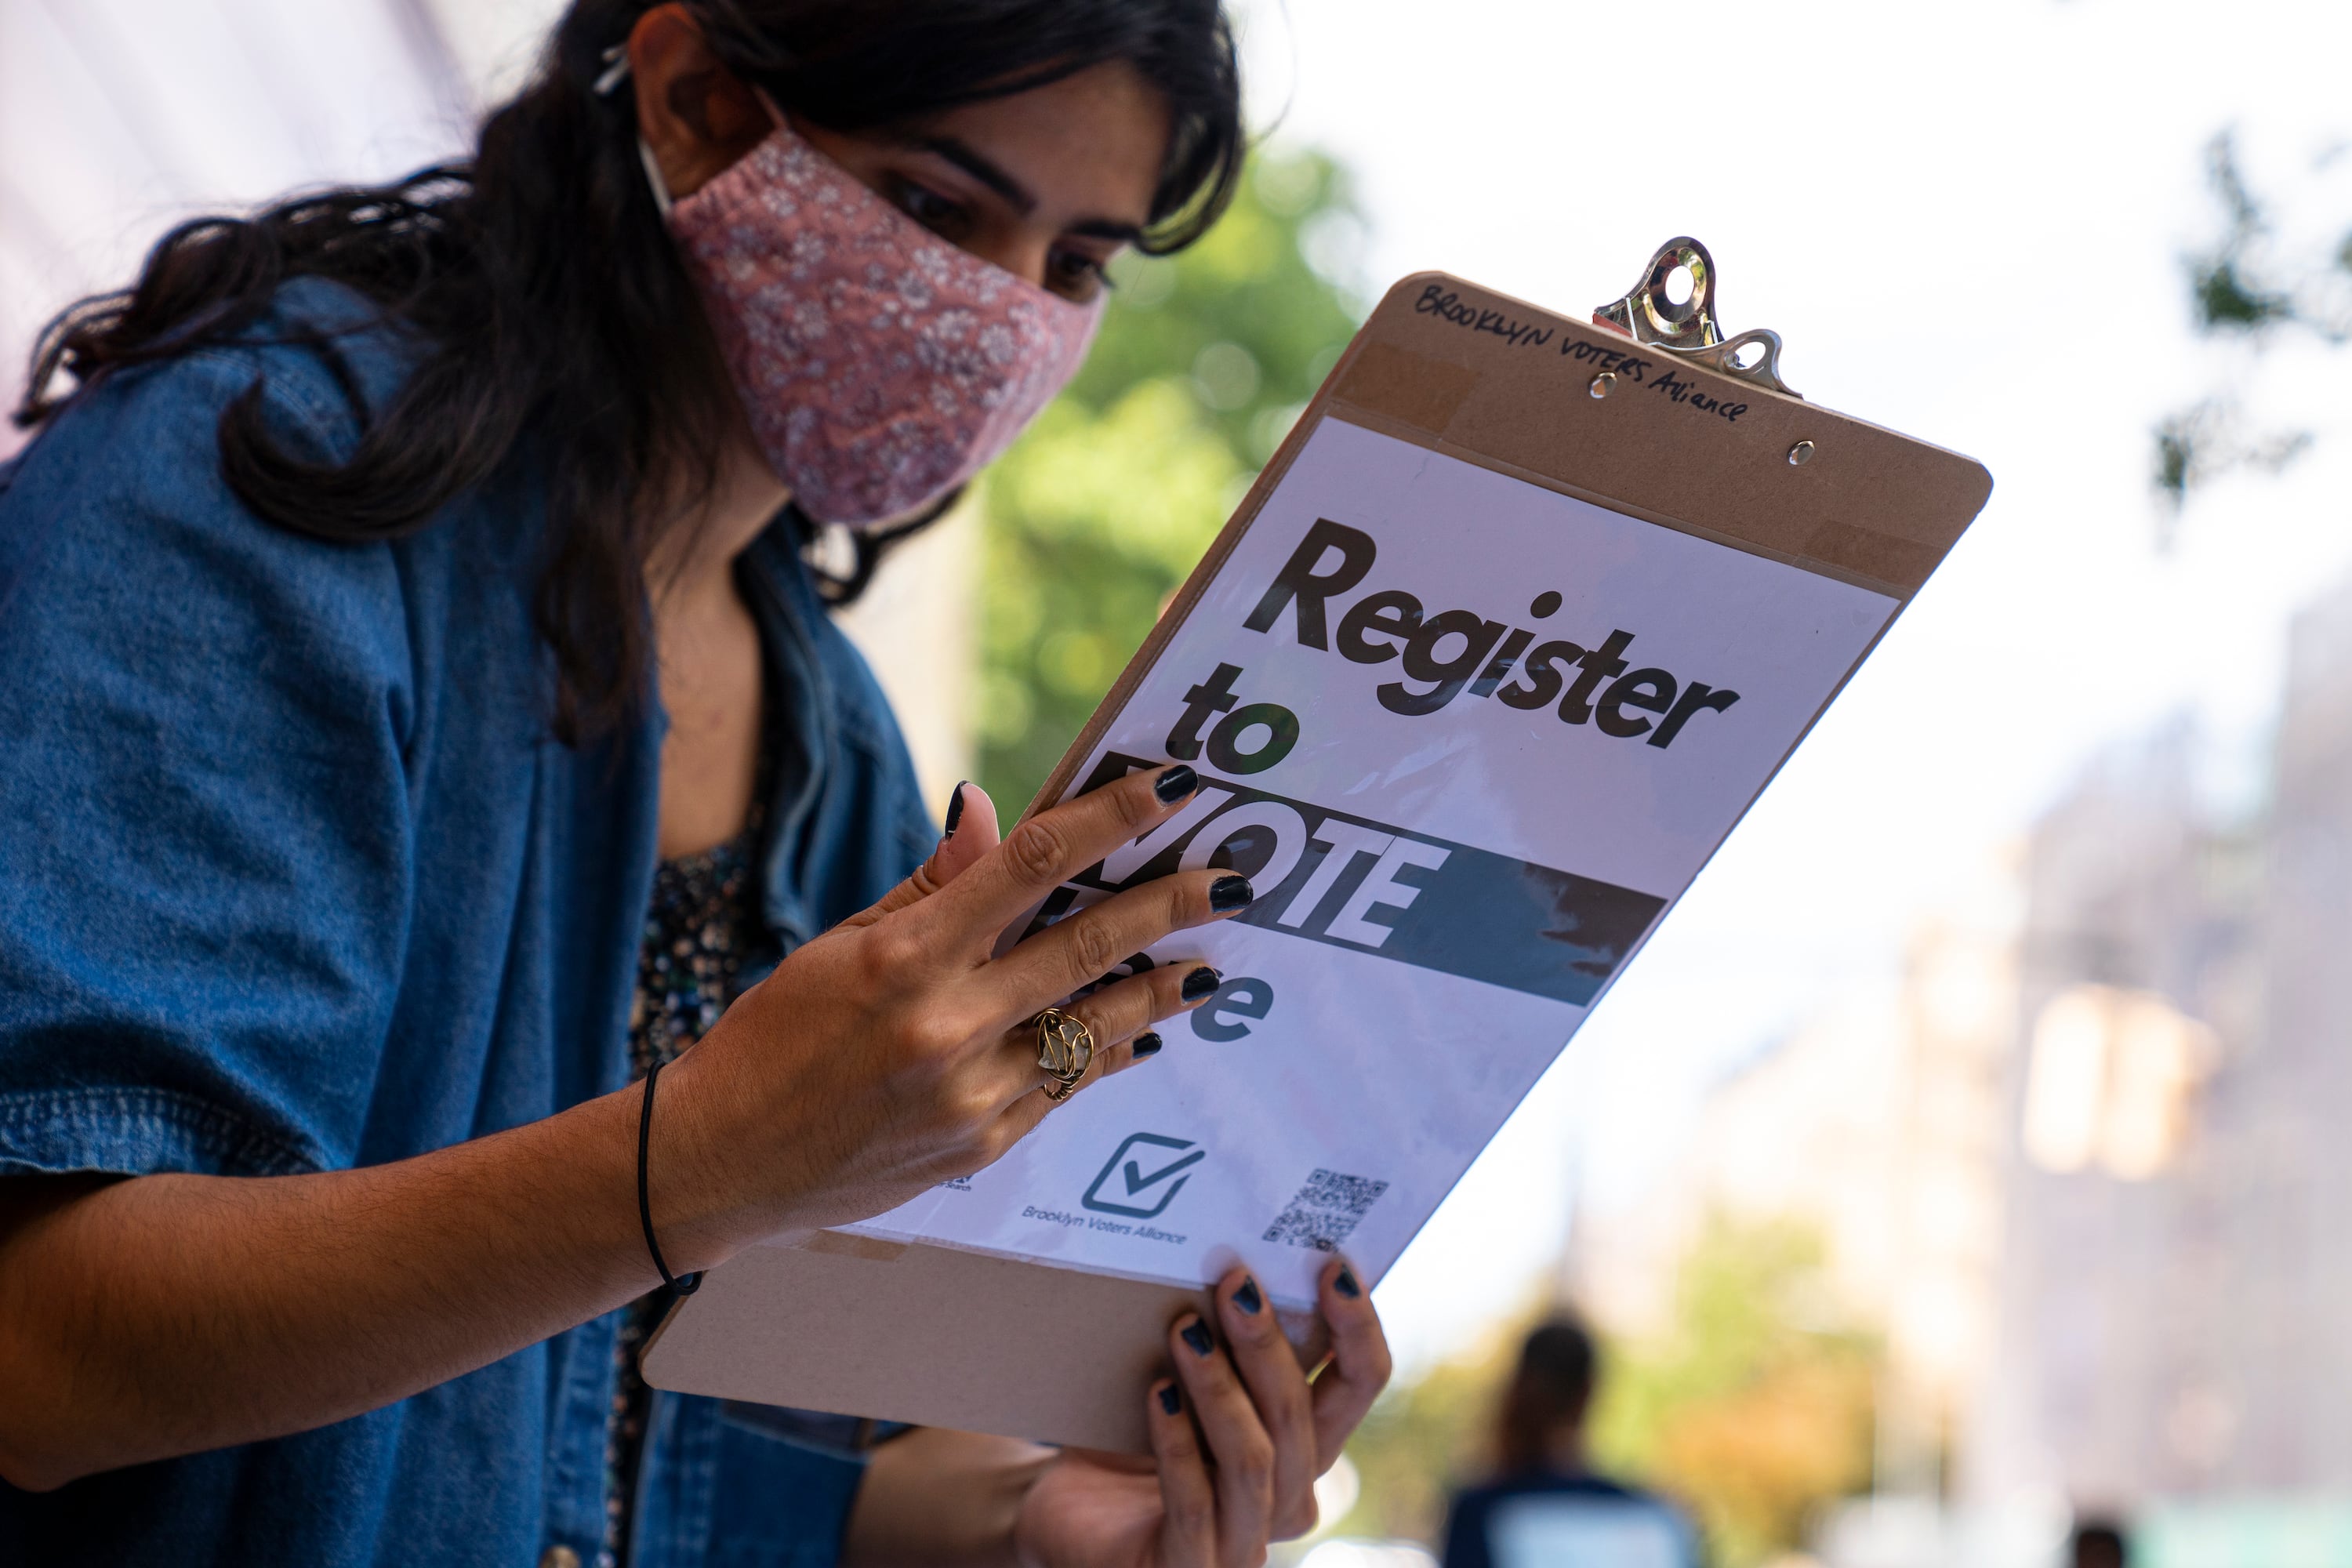 A woman with long brown hair wearing a face mask checks something on a clipboard that says “Register to Vote” on the back of it. 